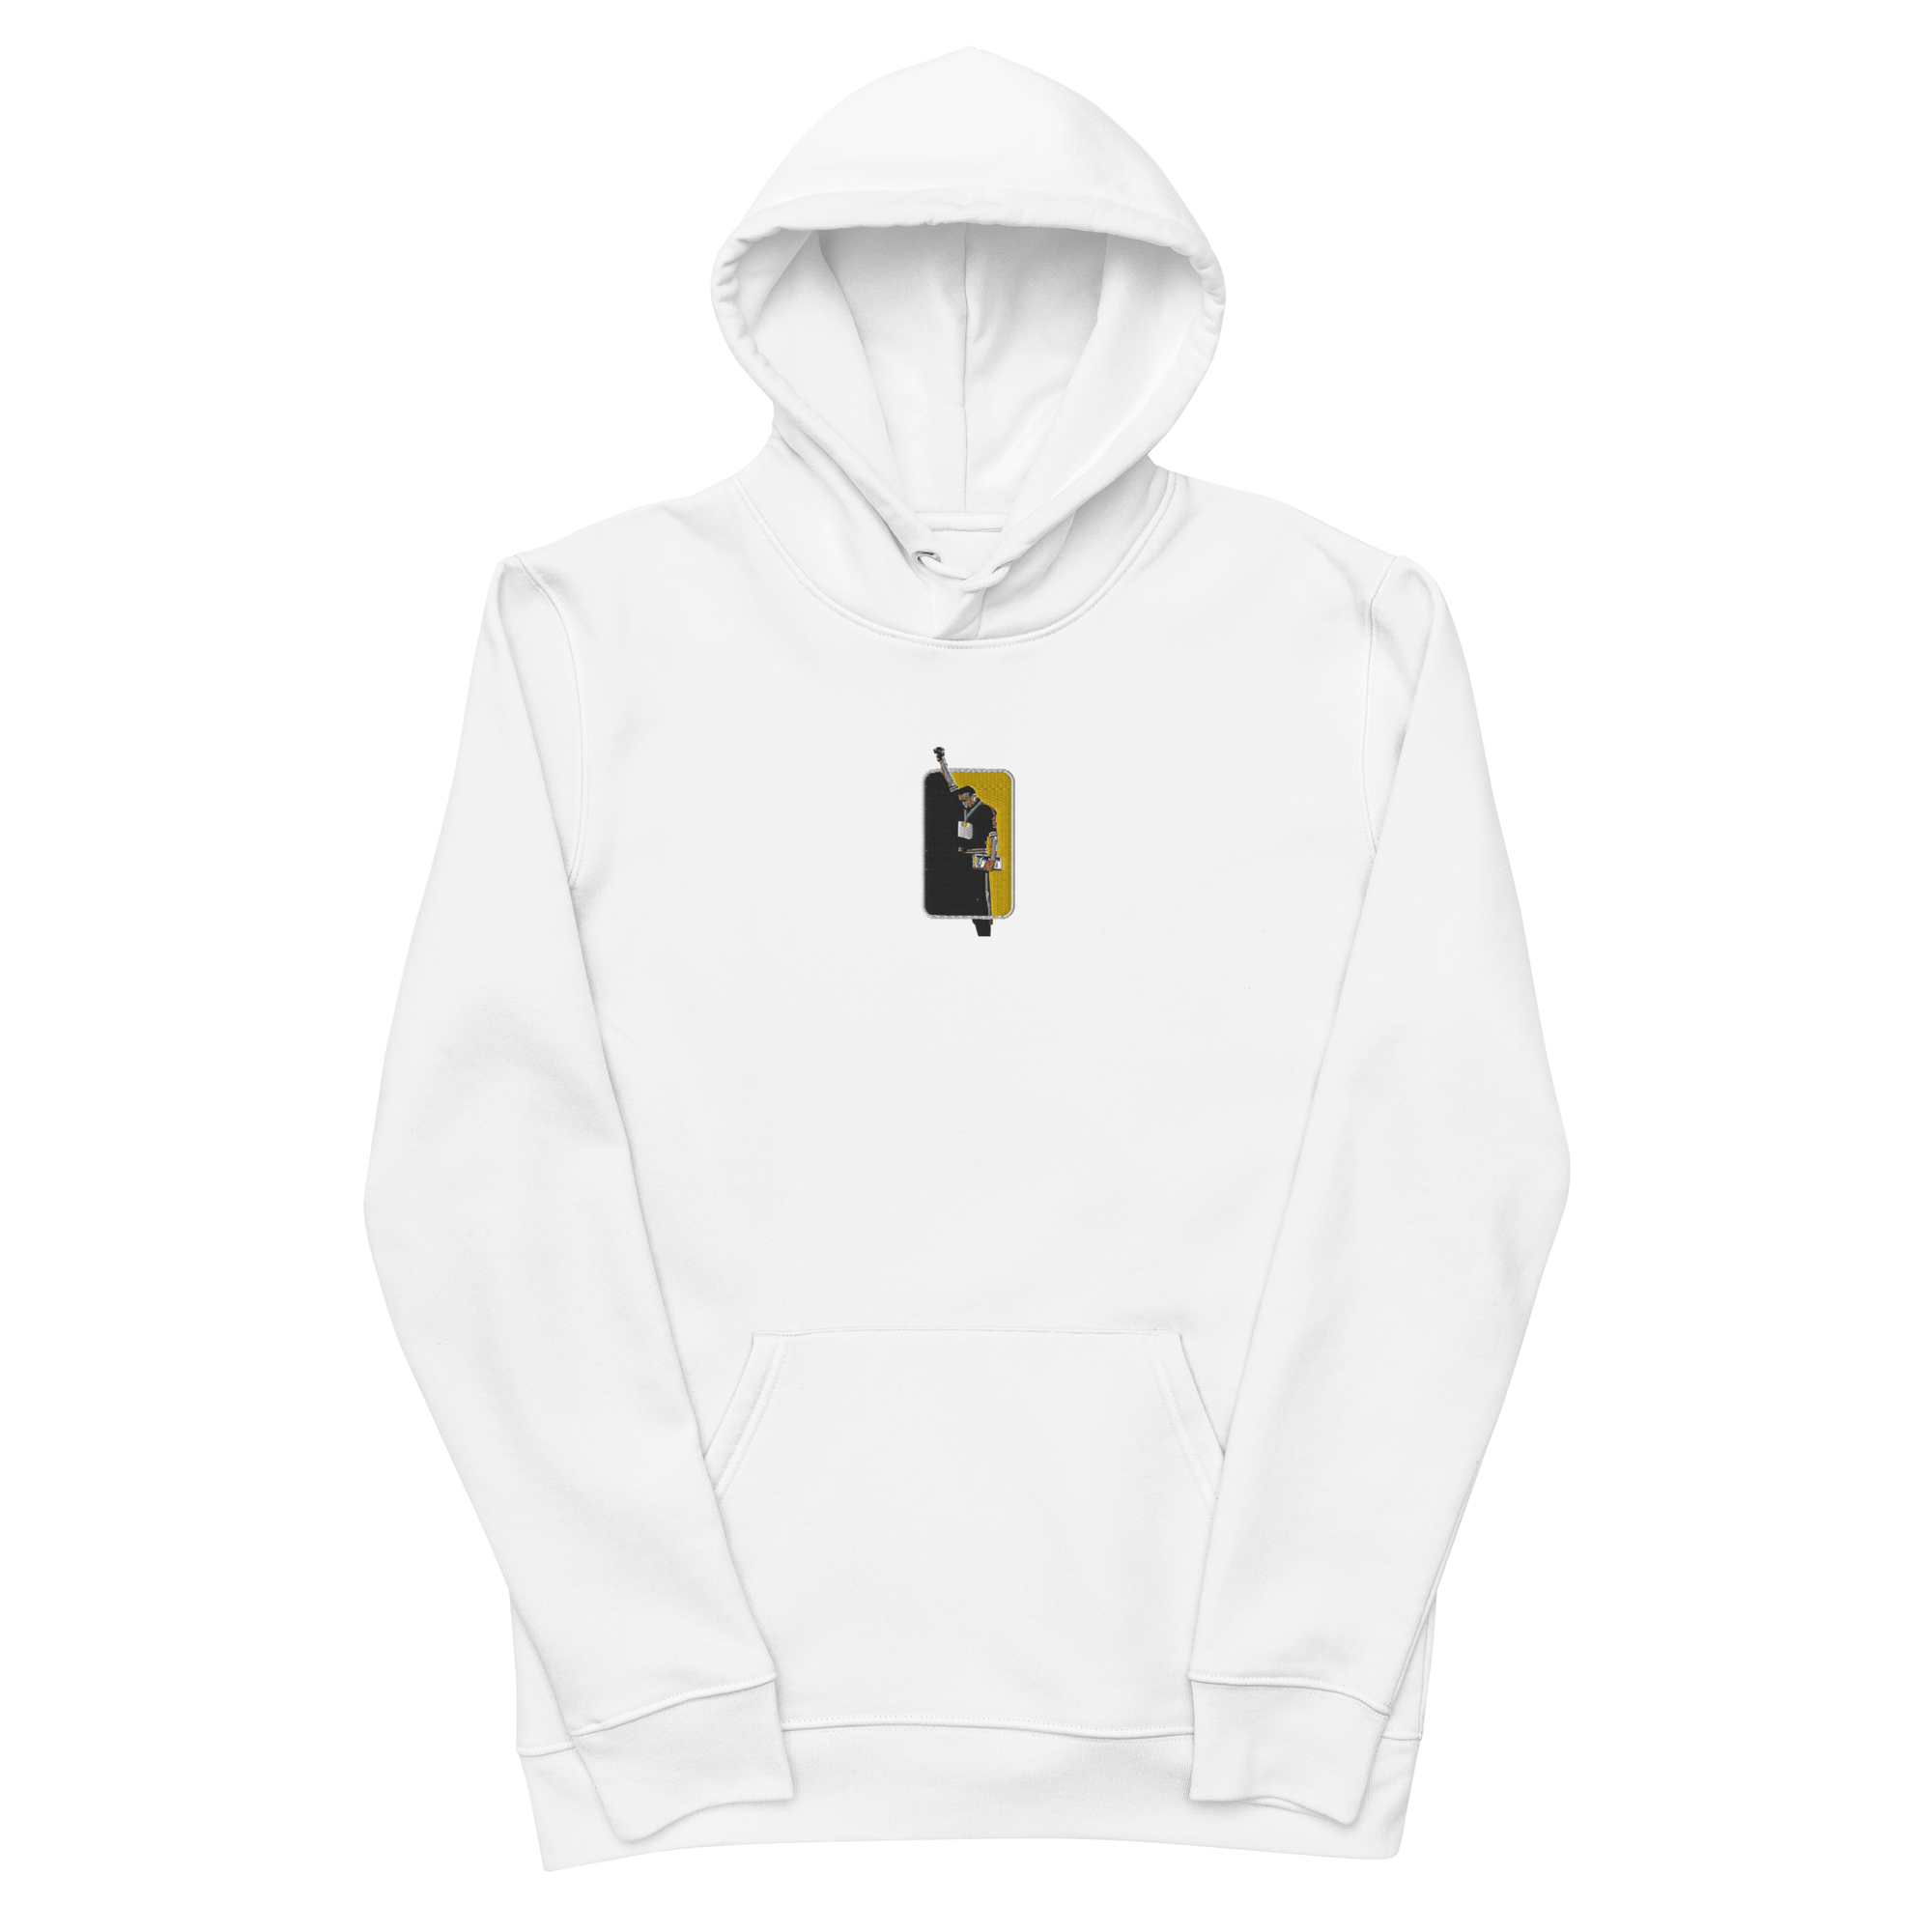 Flatlay image of a regular white hoodie with an embroidered design of Tommie Smith raising his black-gloved fists in protest during the 1968 Mexico Olympics Men's 200m medal ceremony.